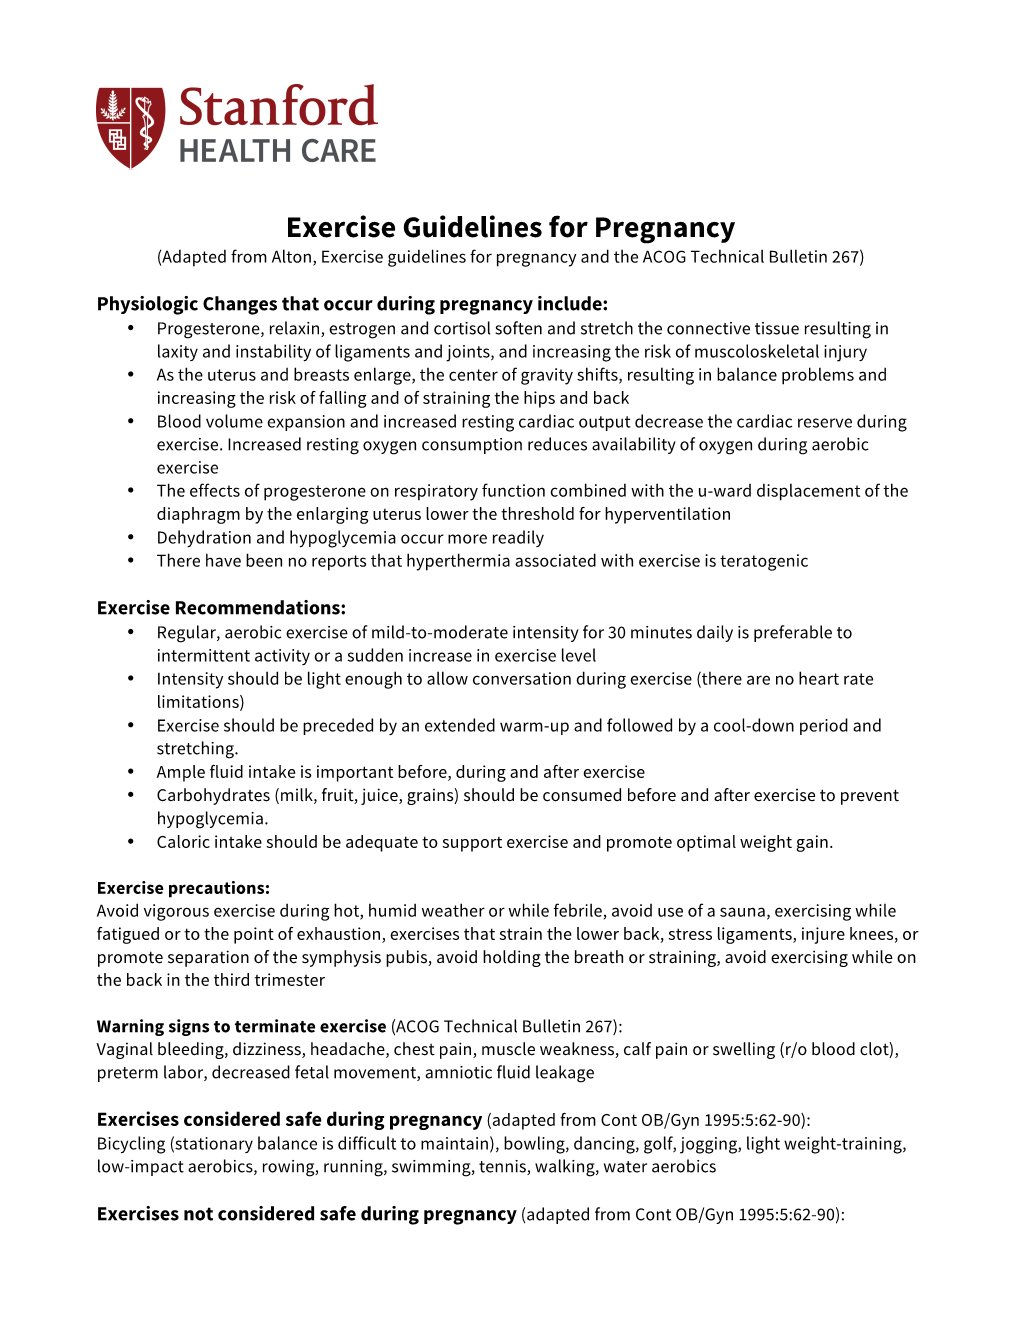 Exercise Guidelines for Pregnancy (Adapted from Alton, Exercise Guidelines for Pregnancy and the ACOG Technical Bulletin 267)